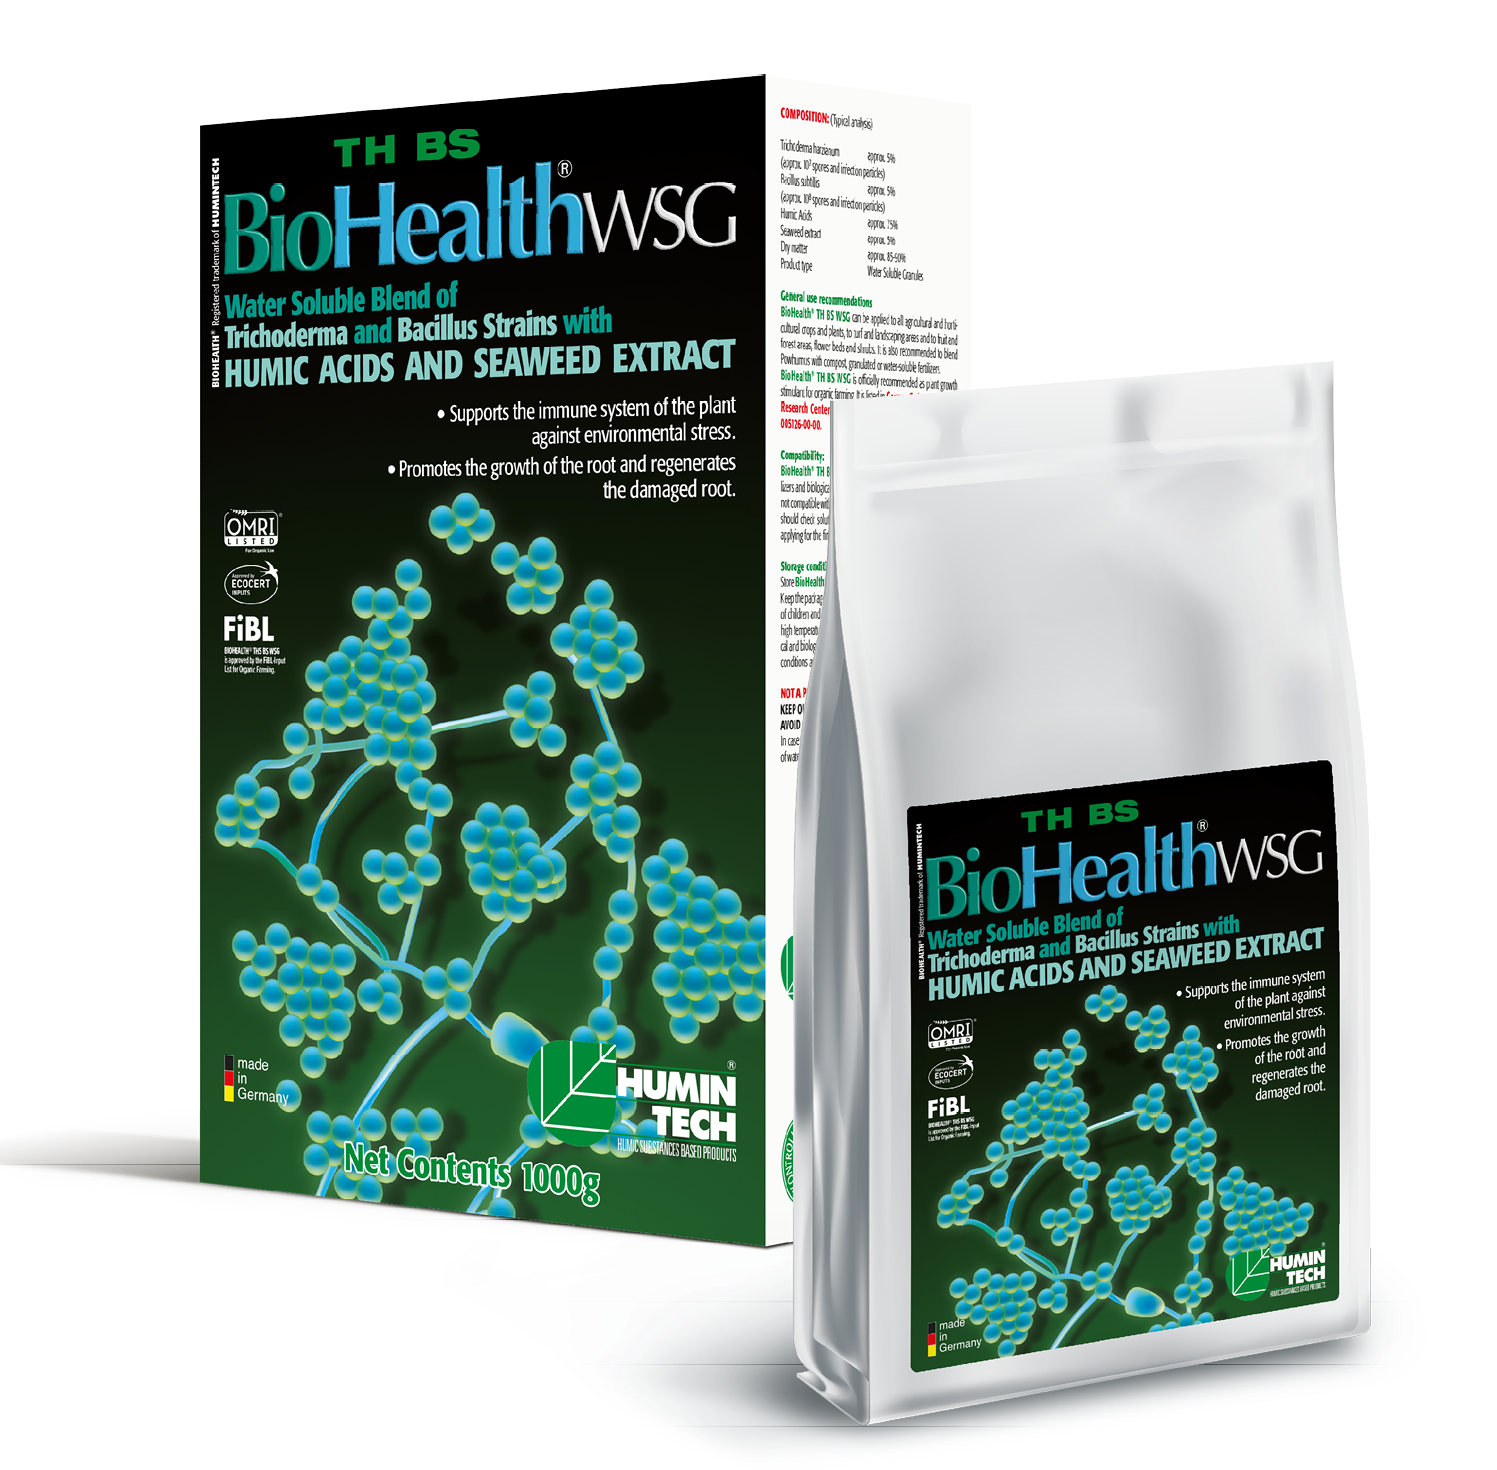 BioHealth TH BS WSG Water Soluble Blend of Trichoderma strains Humic Acids and Seaweed Extract